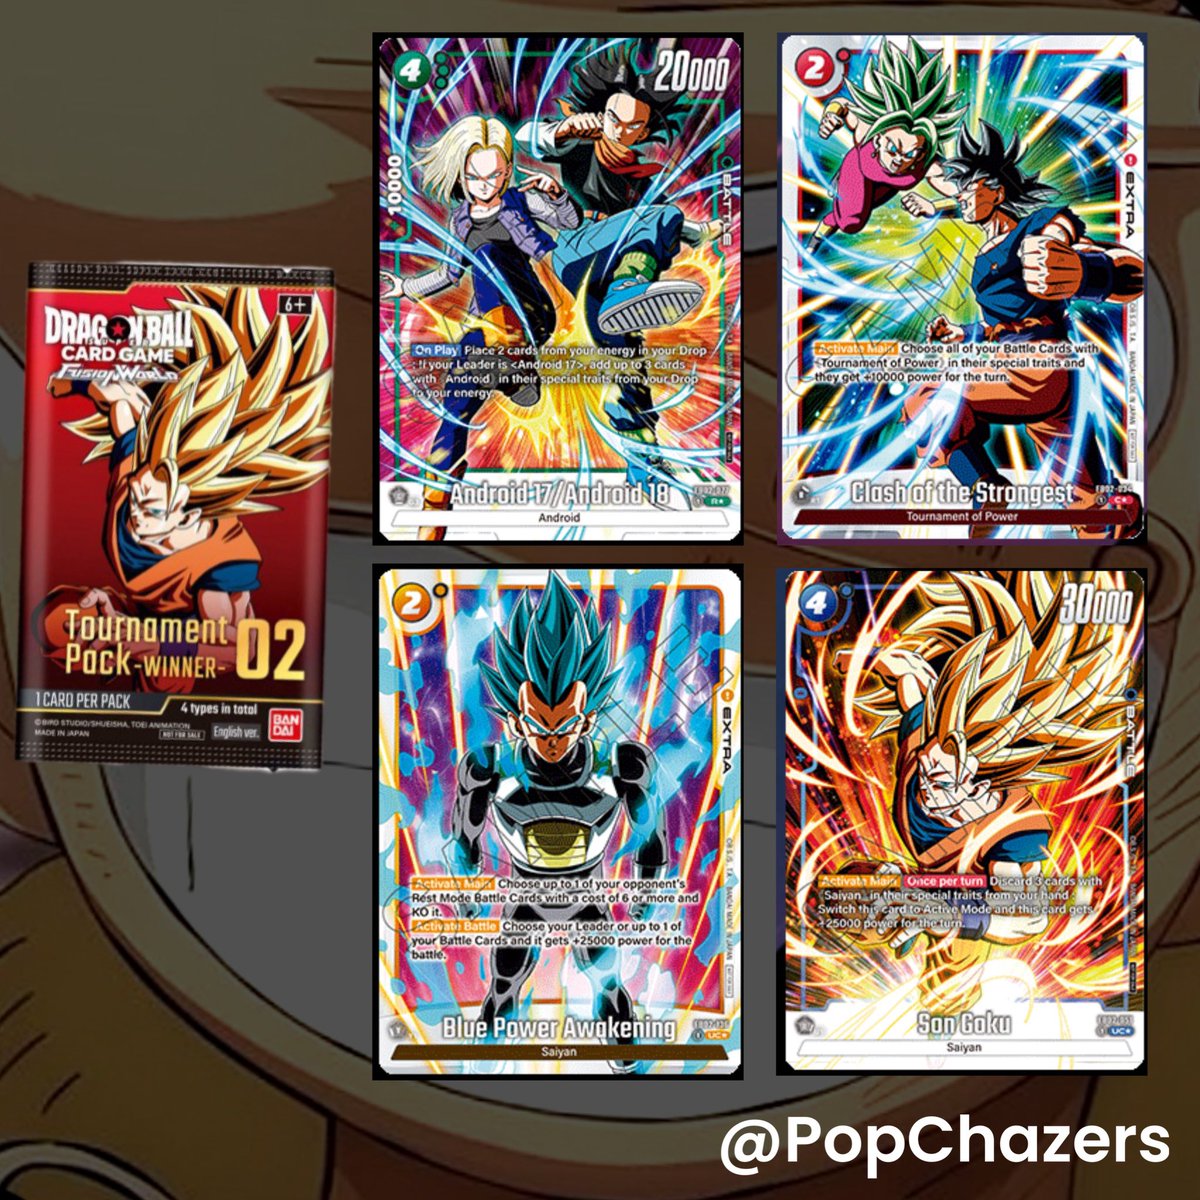 Dragon Ball Super Fusion World FB-02 Tournament Pack Winner 02 Card Reveals!! 

⭐️ This Pack is apart of the FB-02 Sealed Events!

#dragonballsuper #dbscardgame #dbsfw